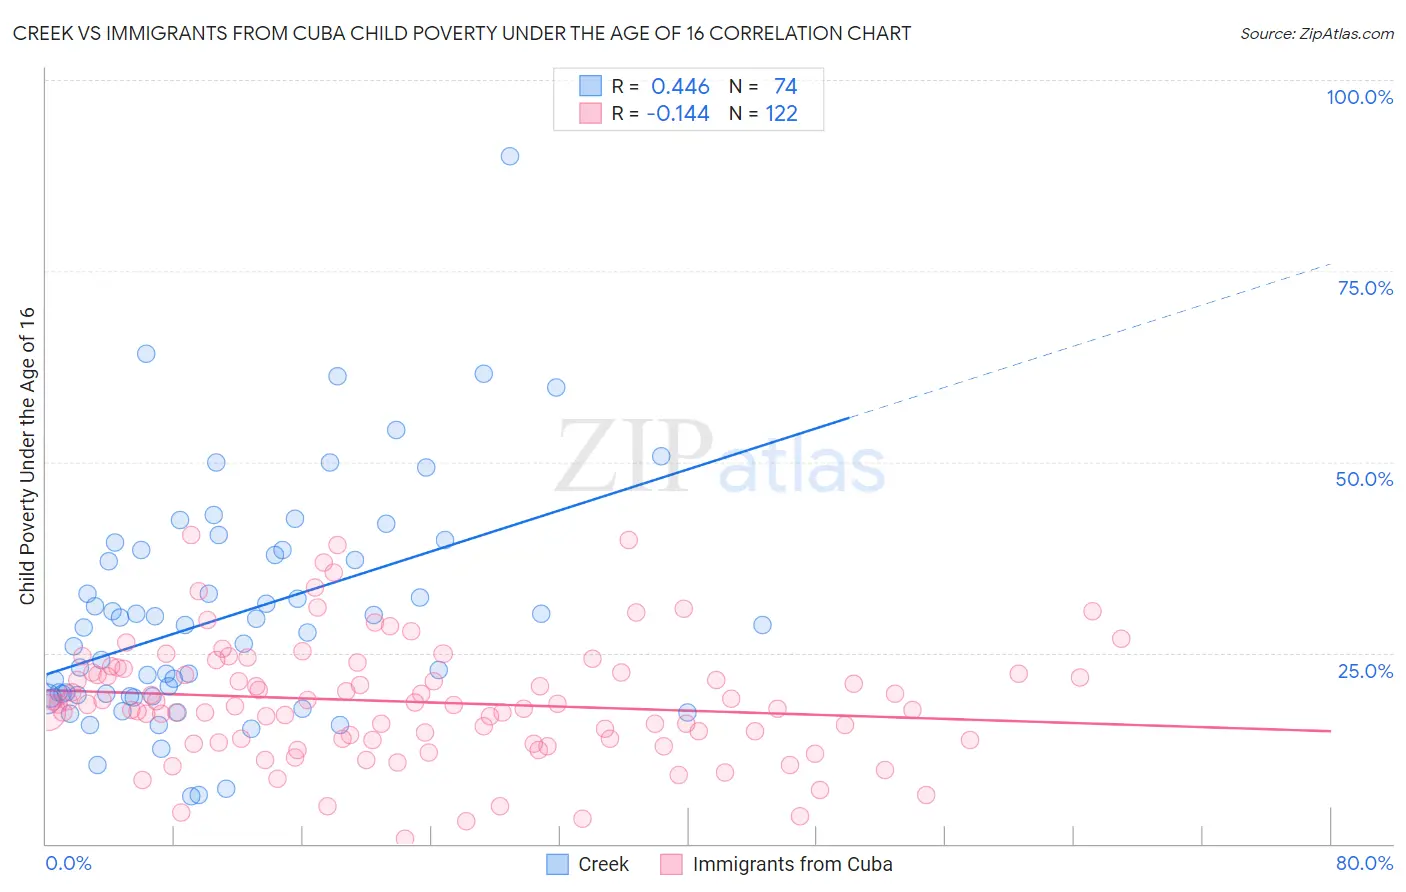 Creek vs Immigrants from Cuba Child Poverty Under the Age of 16